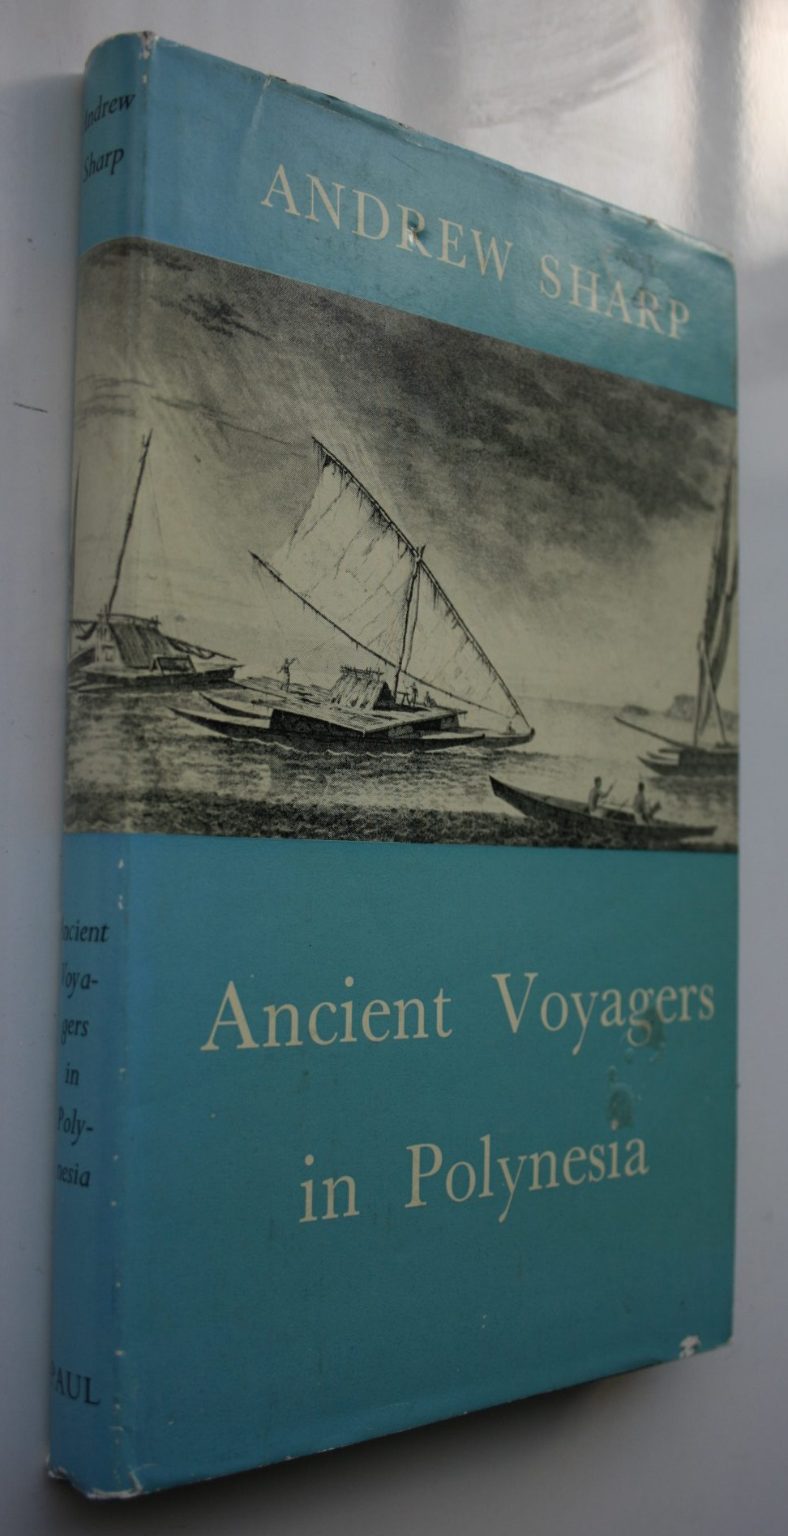 Ancient Voyages In Polynesia. 1963 first edition. by Andrew Sharp.